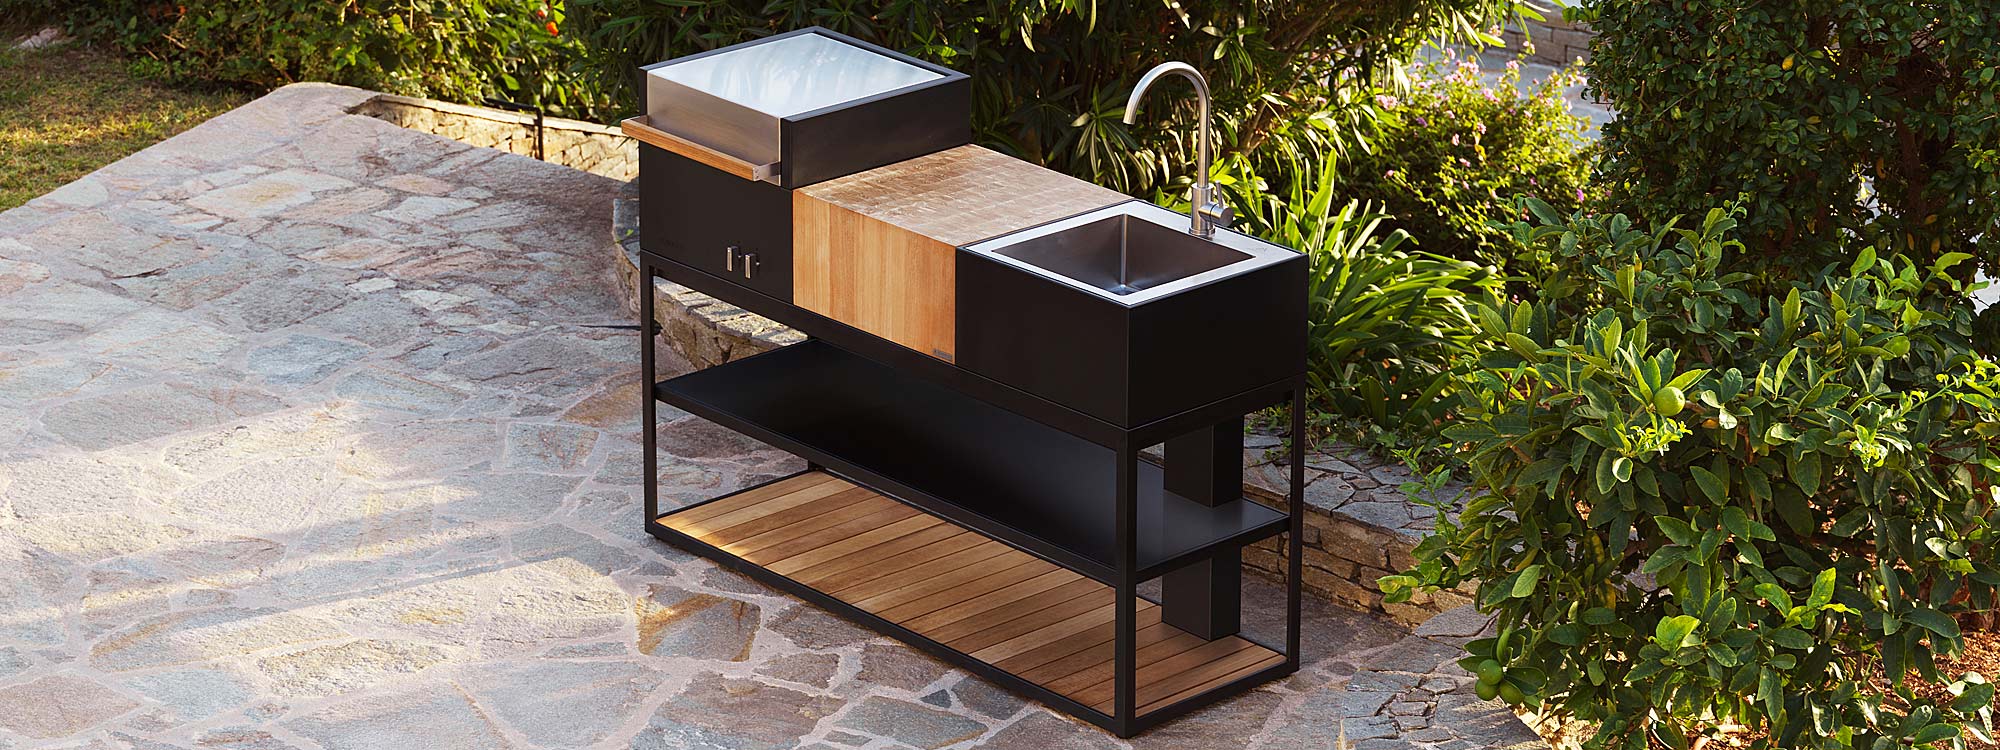 Image of aerial view of Roshults Open Kitchen minimalist bbq in anthracite coloured stainless steel, and outdoor sink with teak chopping board